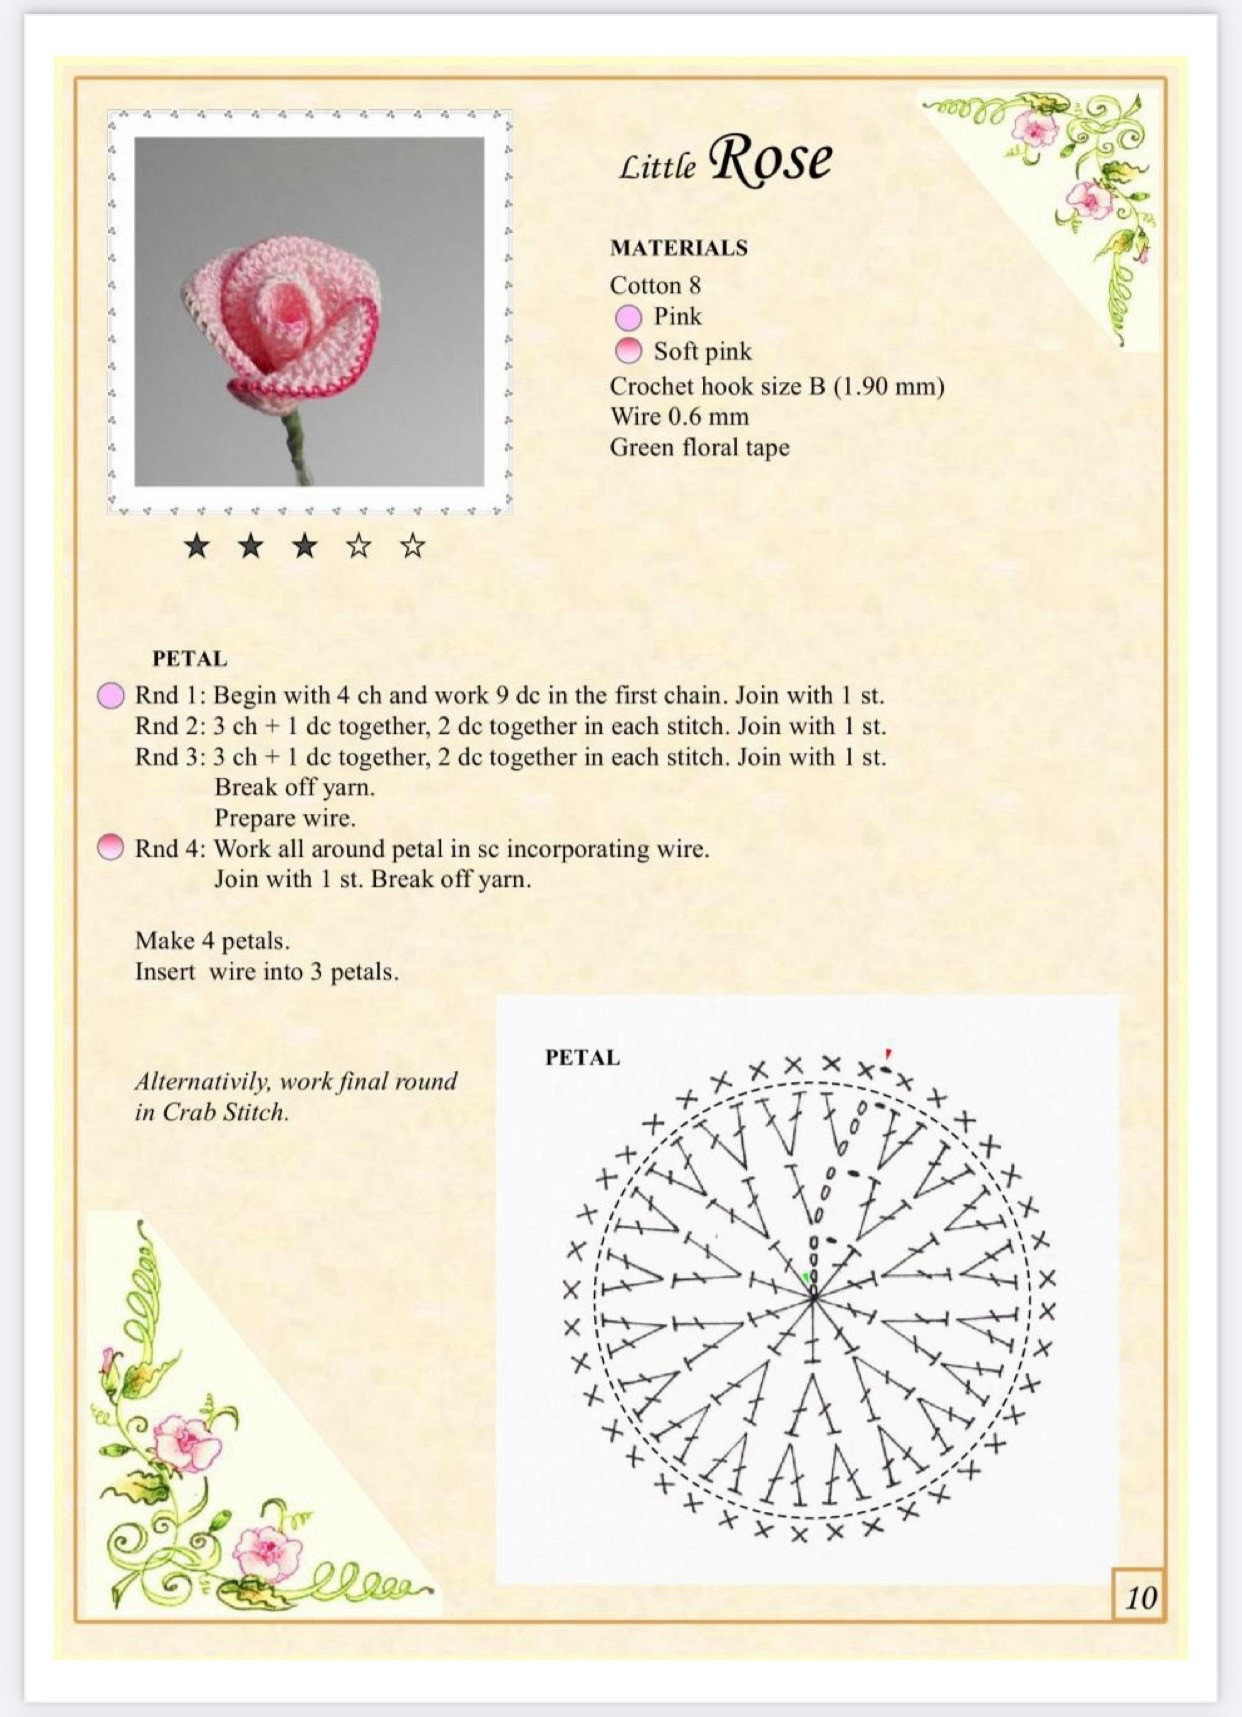 Crochet pattern Collection of crochet patterns for 10 types of flowers: calla lily, little rose, pansy, camomile, forget me not, bud, unopened bud, leaf, decorative curl